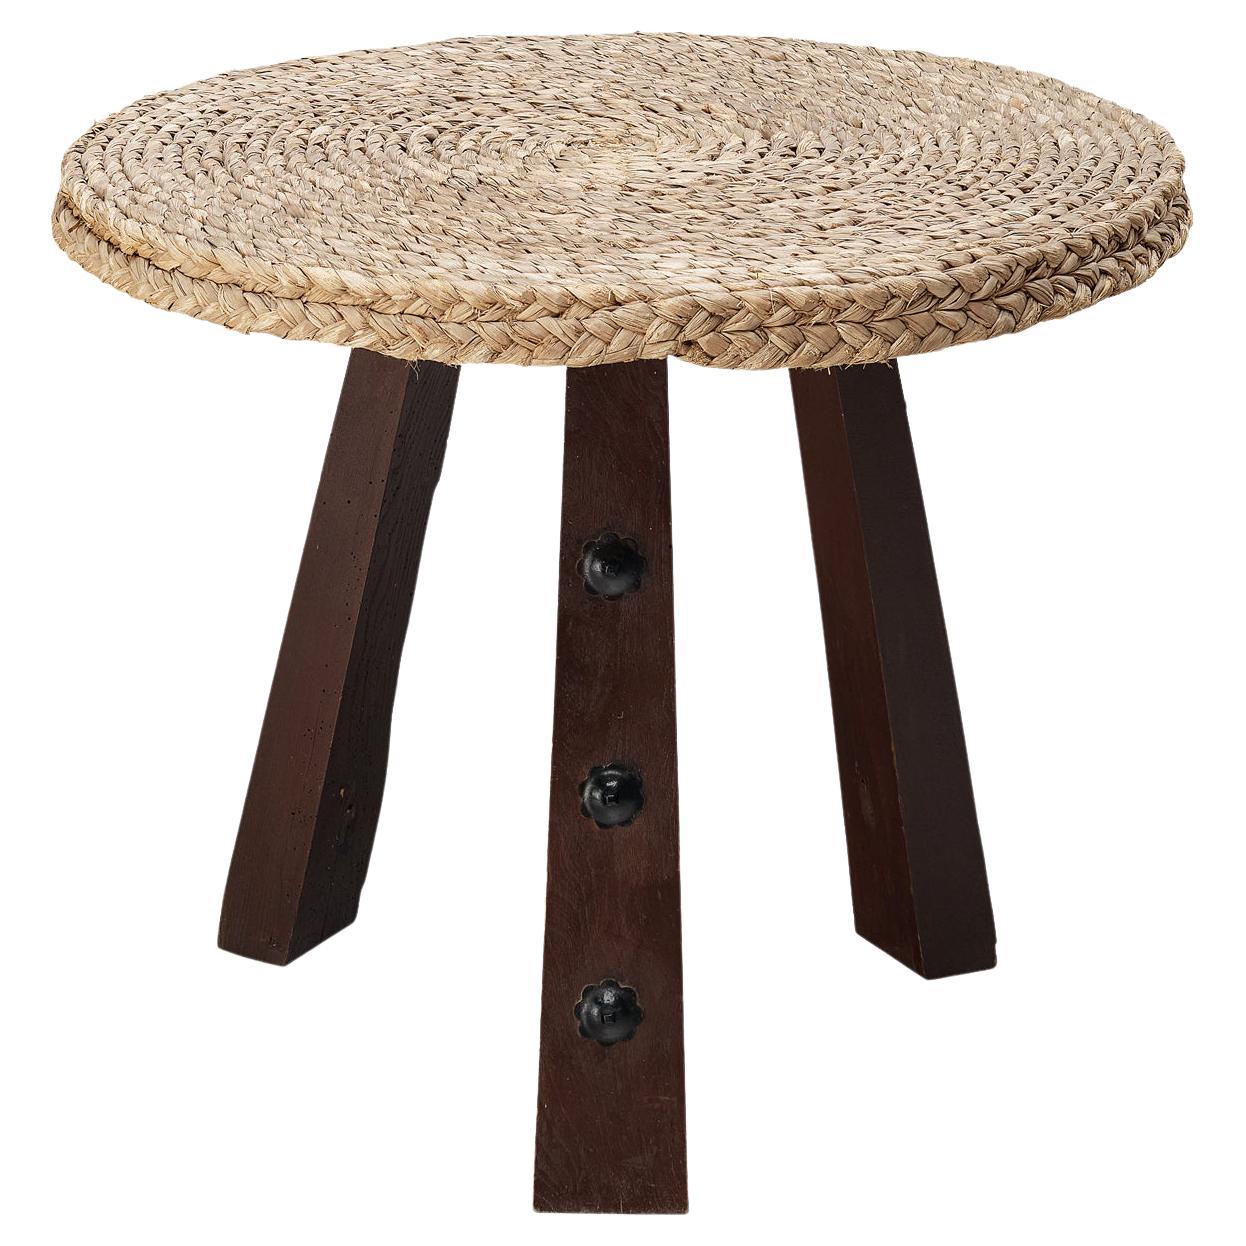 Spanish Table in Braided Straw For Sale